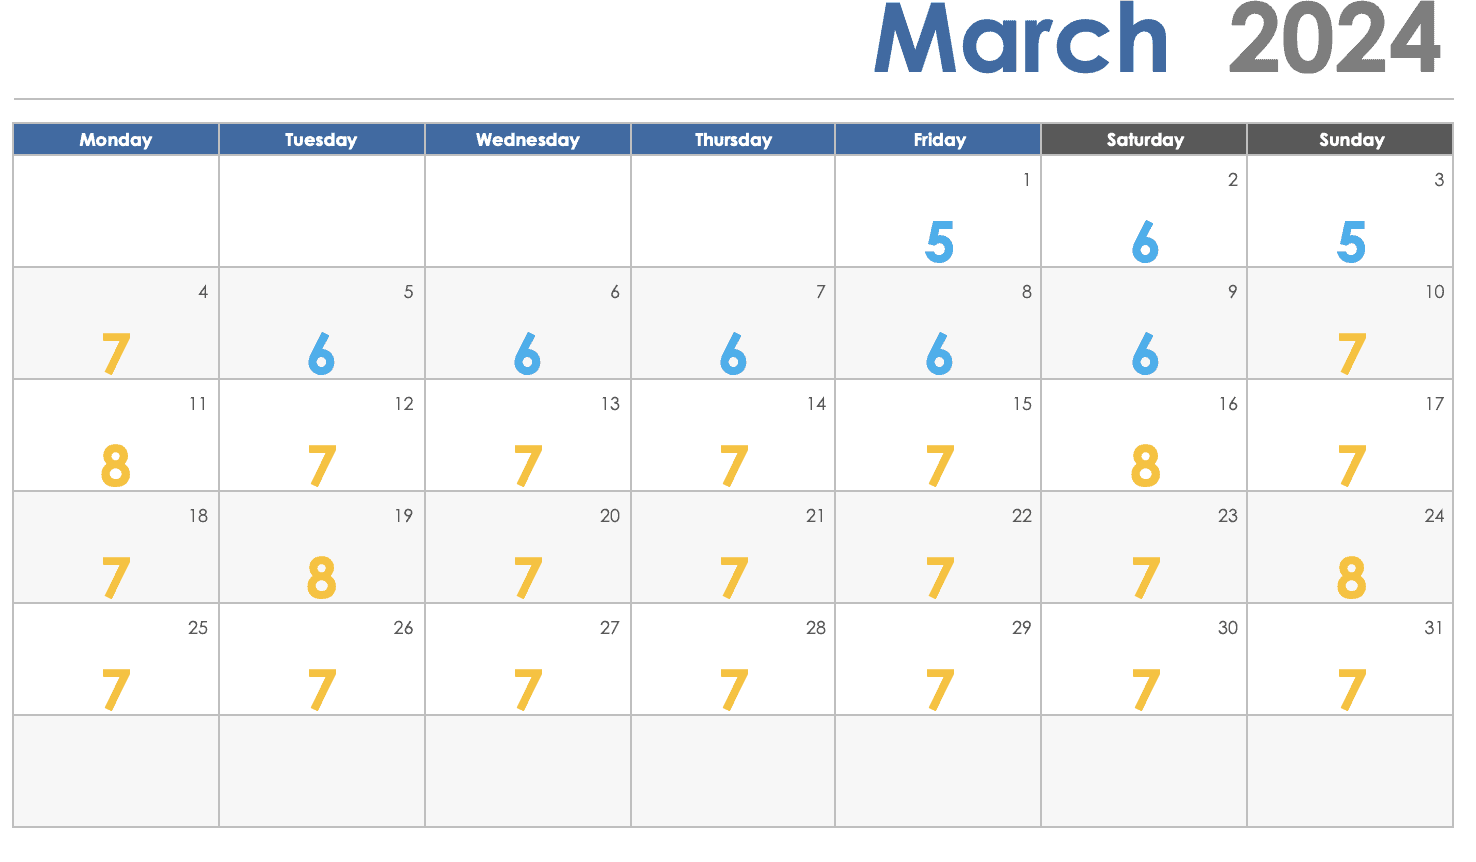 Disney Crowd Calendar March 2024 Crowd Levels Is it packed at Disney World